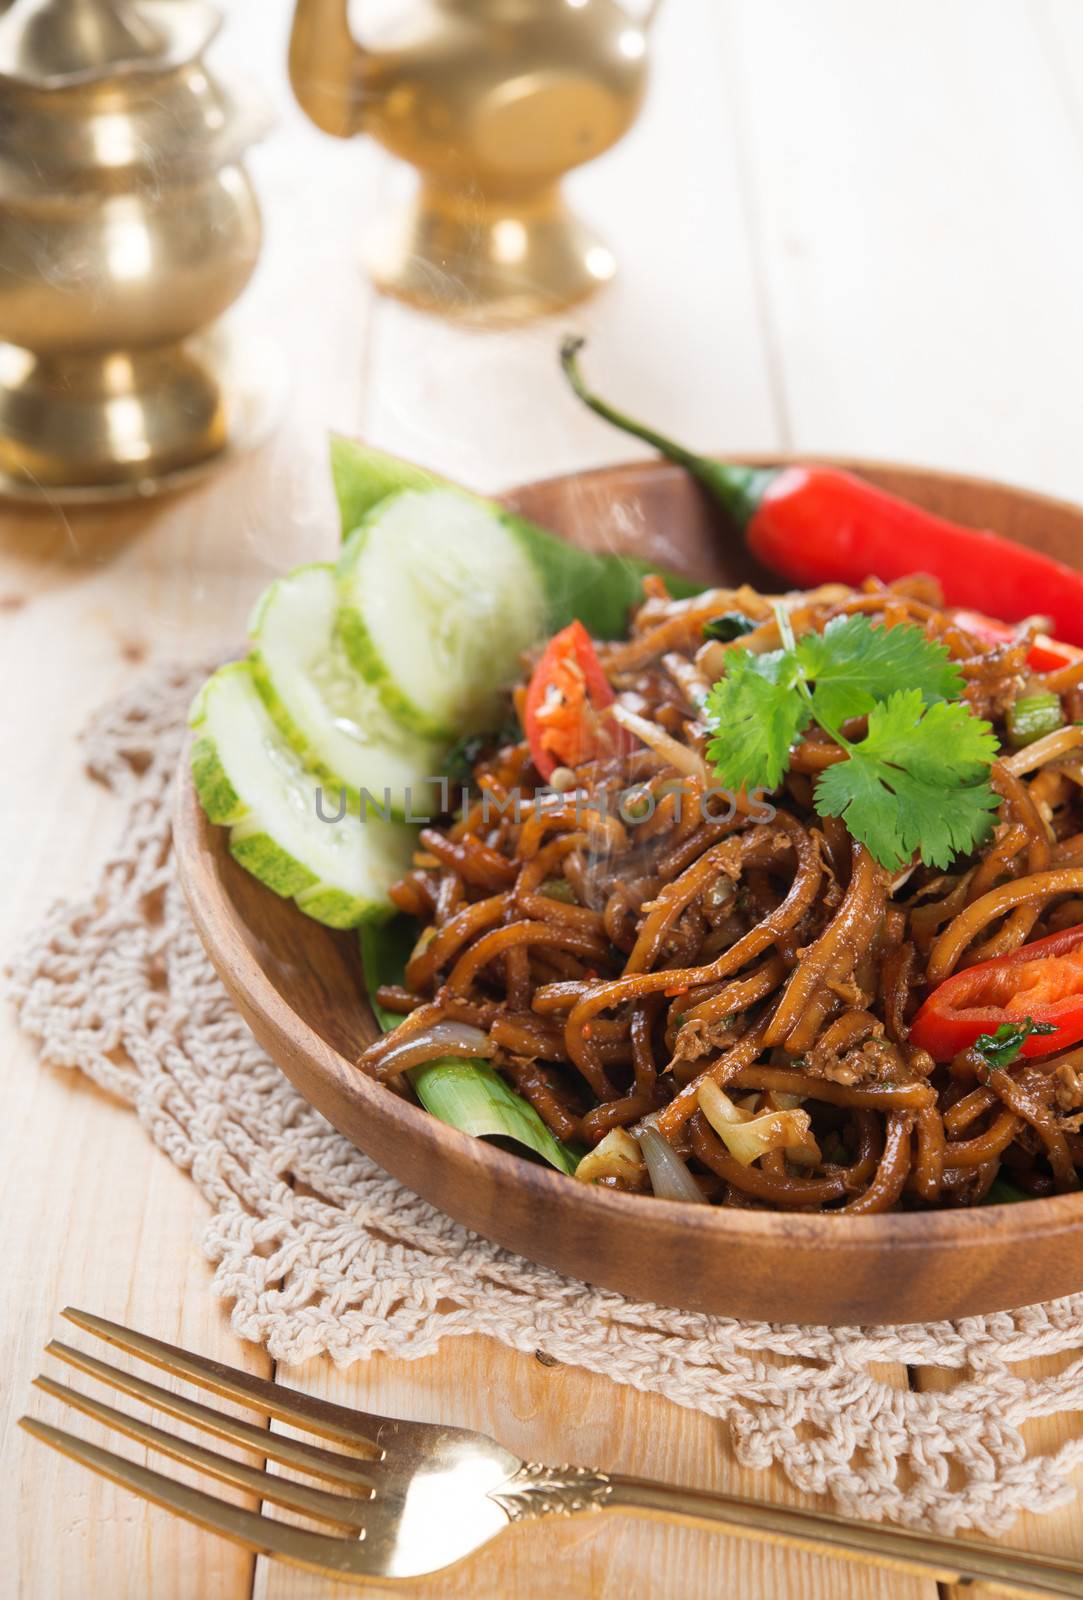 Spicy fried noodles. Indonesian and Malaysian cuisine, mi goreng or mee goreng mamak with wooden dining table setting. Fresh hot with steamed smoke.